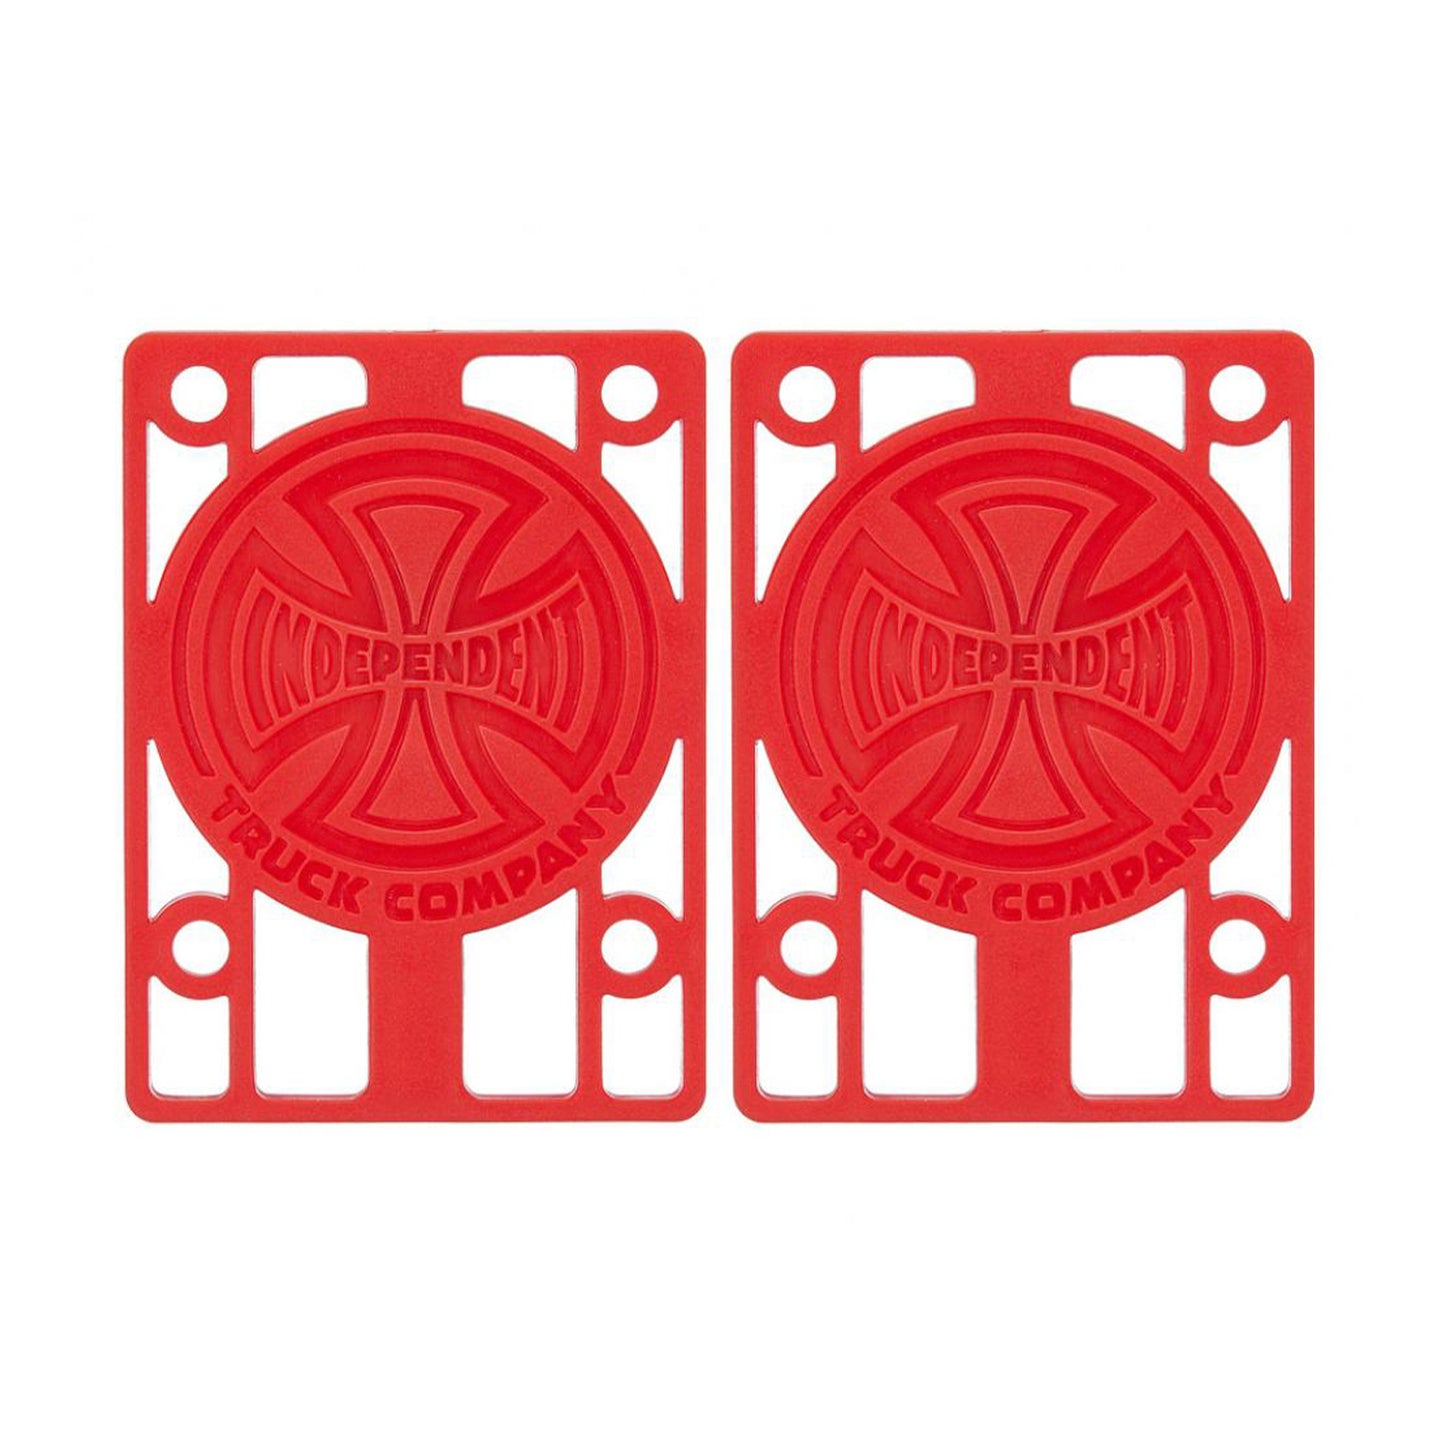 Independent 1/8" Riser Pads - Red - Prime Delux Store